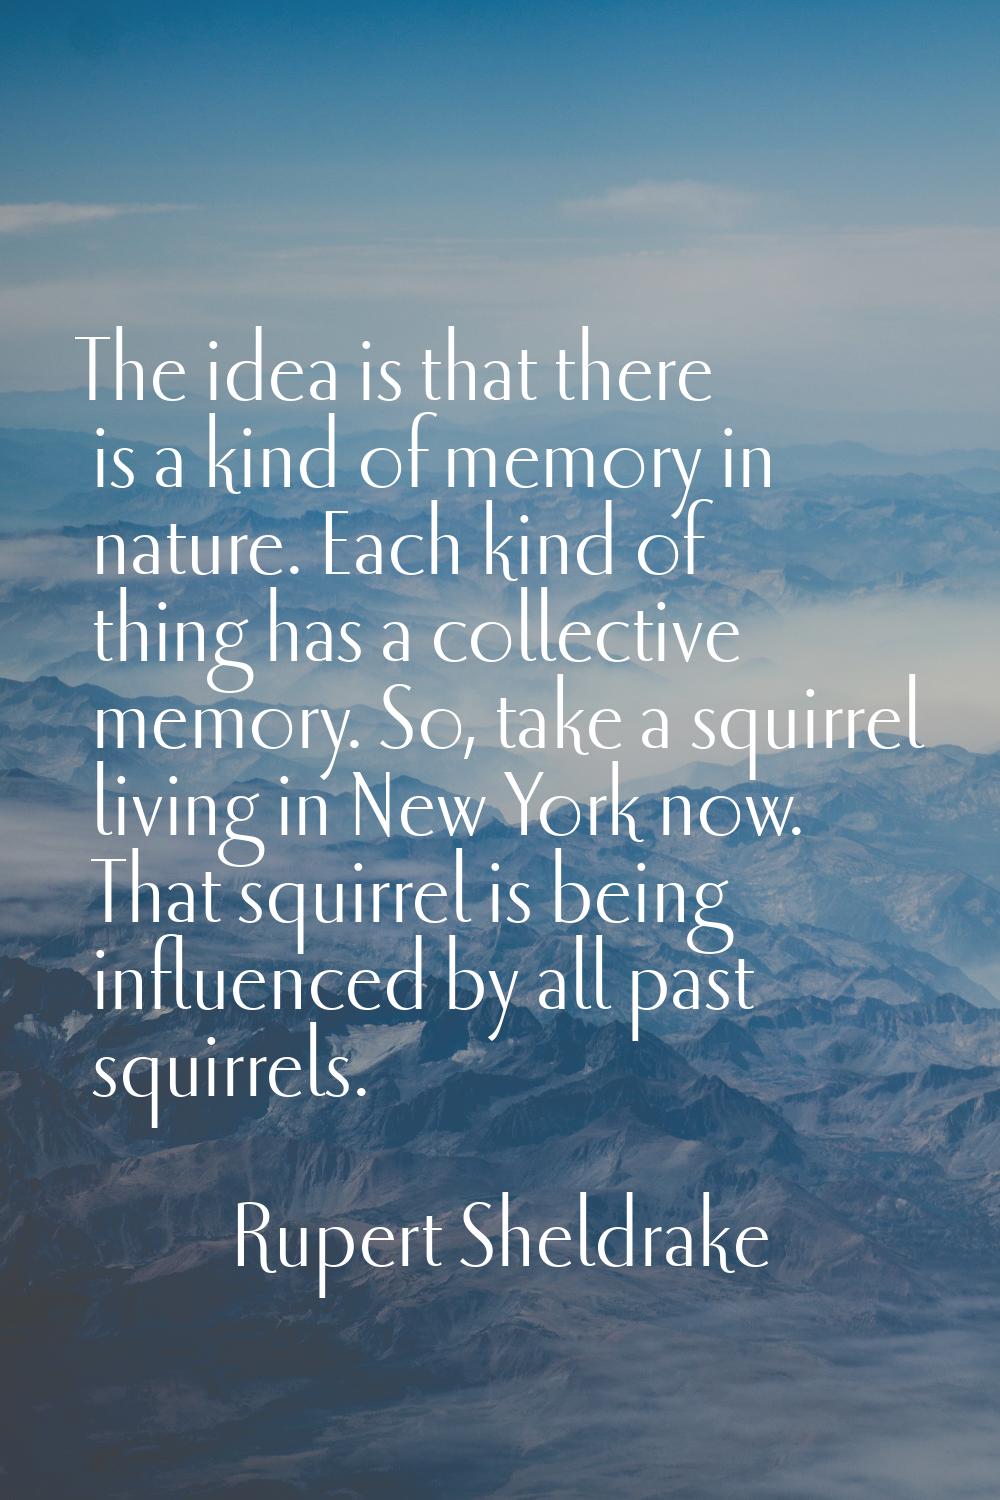 The idea is that there is a kind of memory in nature. Each kind of thing has a collective memory. S